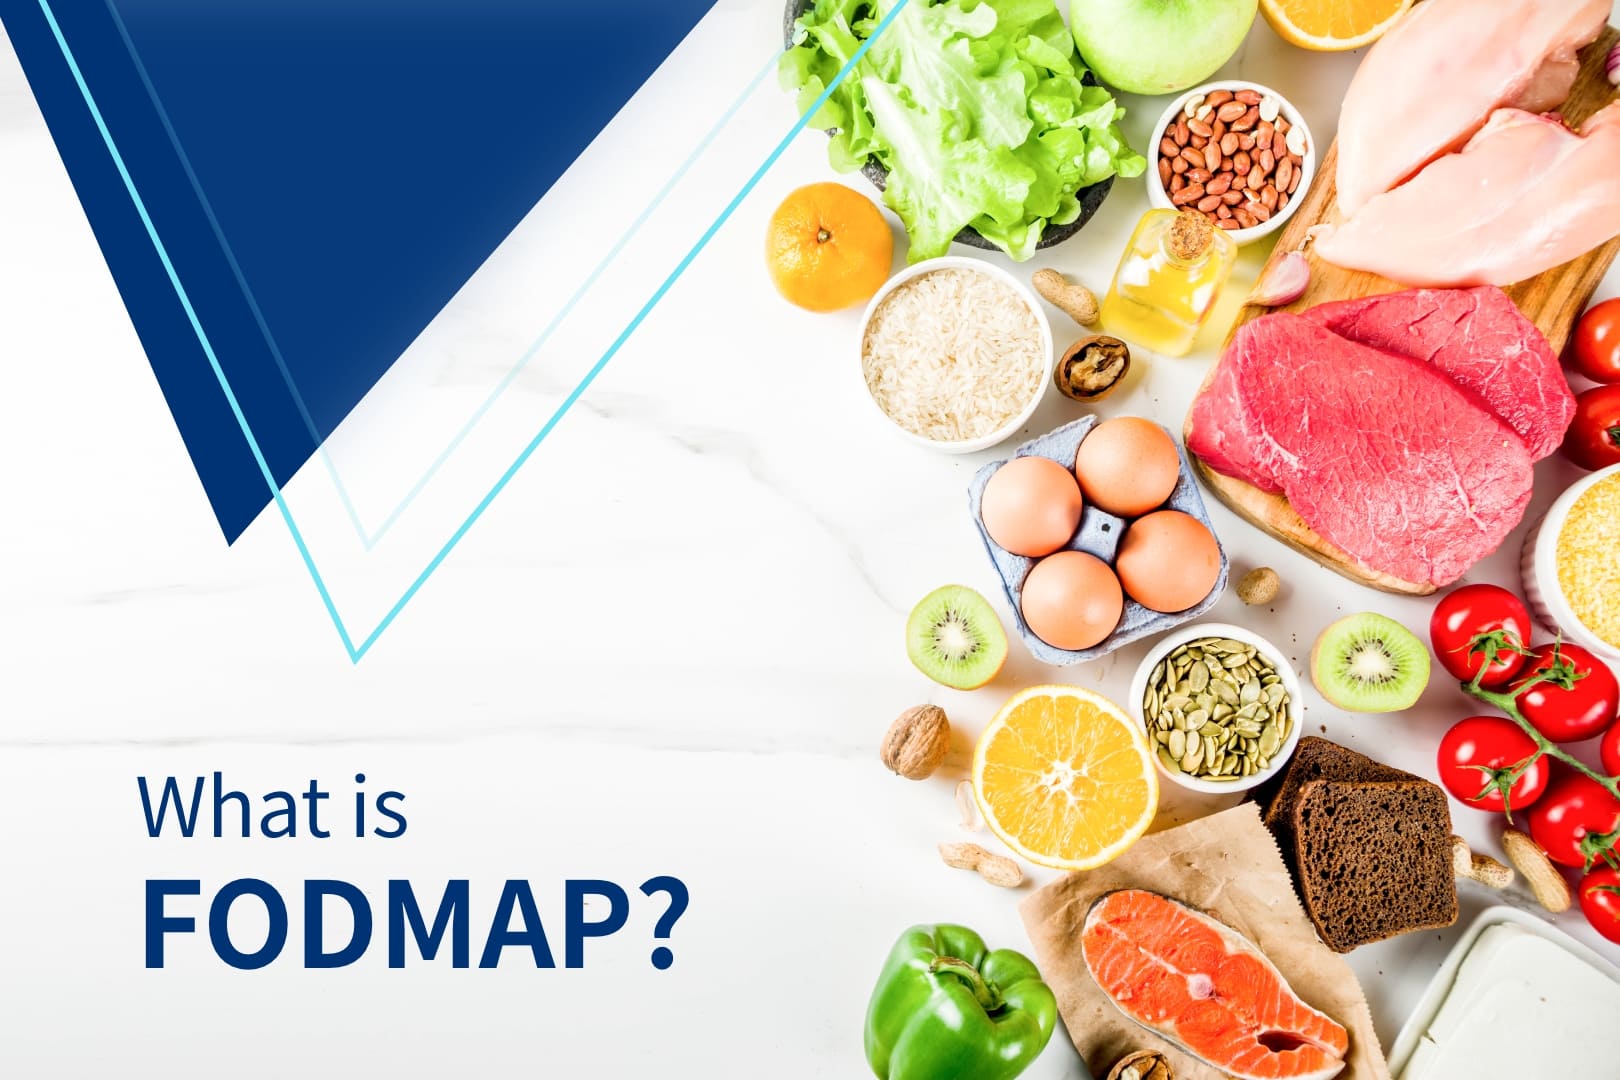 What is FODMAP